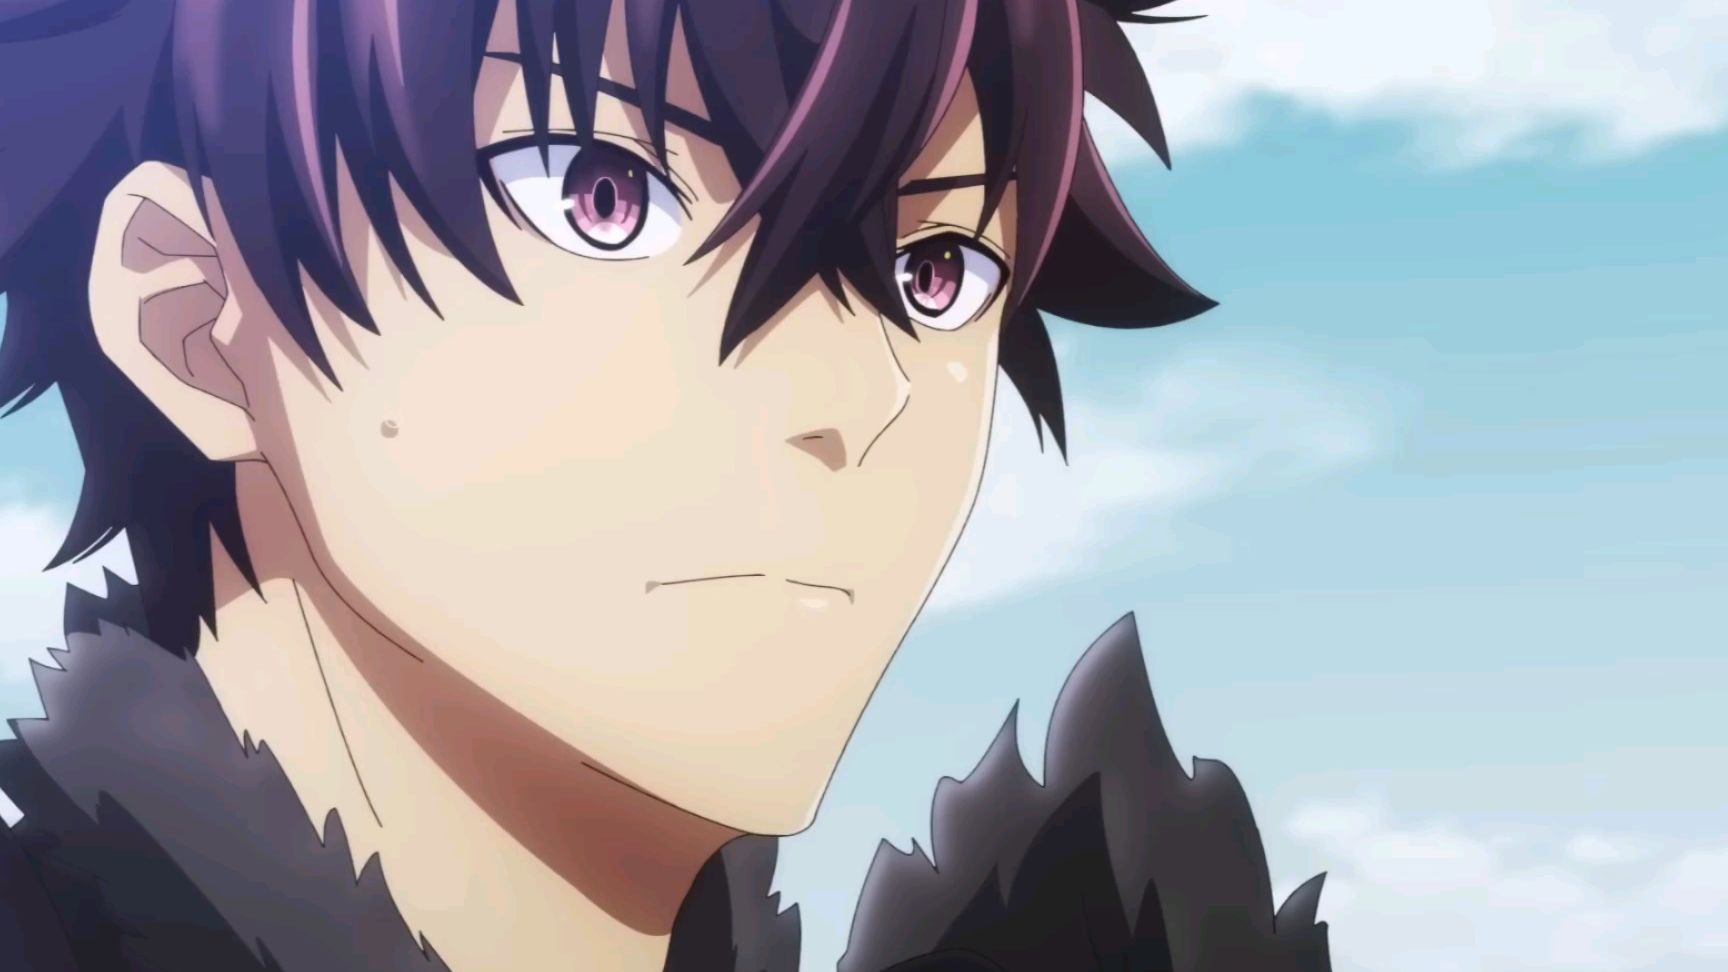 Hero Rises Up in I Got a Cheat Skill in Another World TV Anime